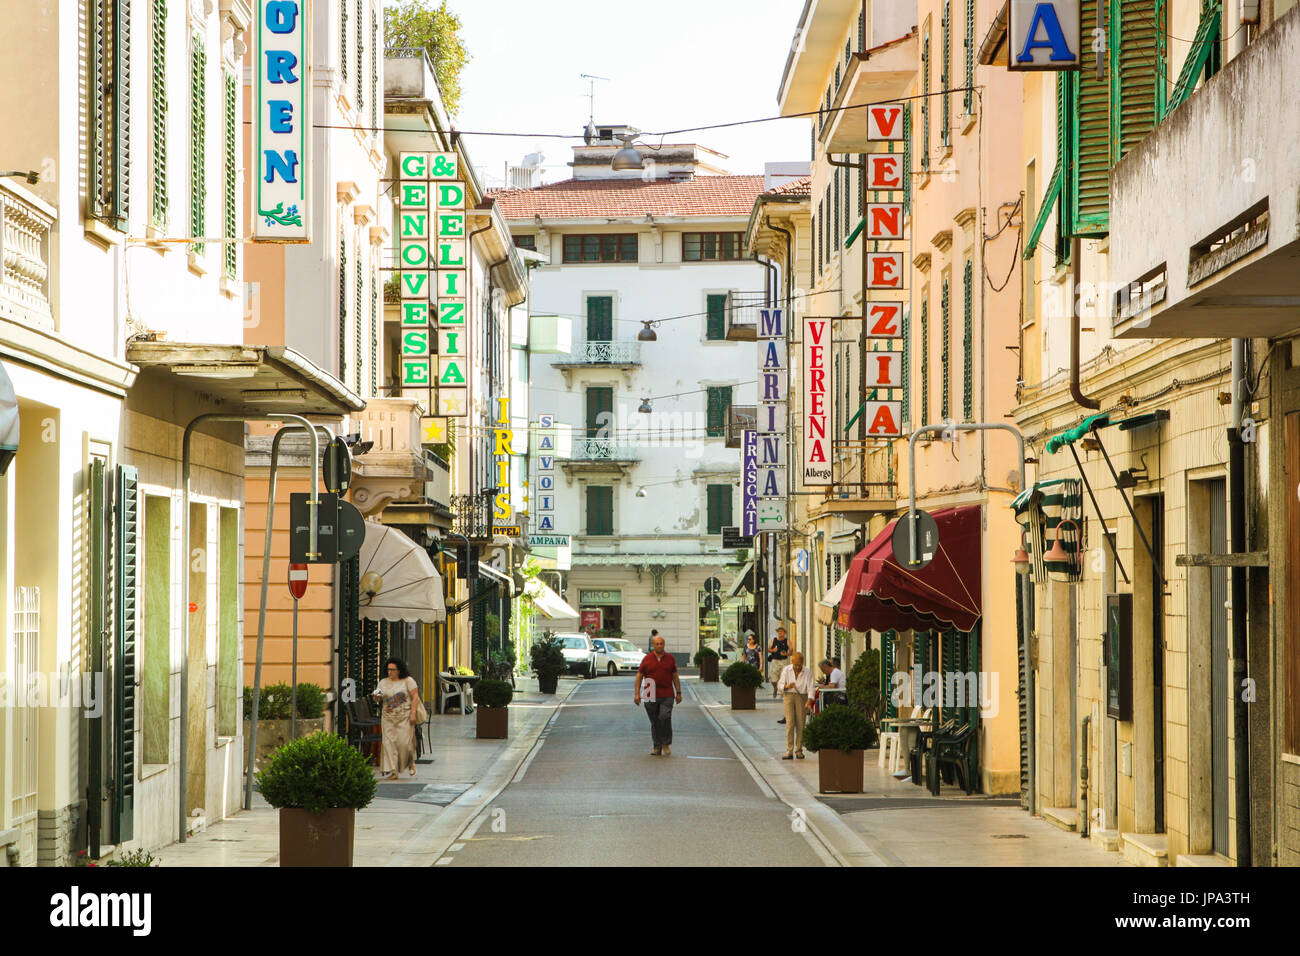 PISA, Italy - JUNE 21, 2017 - Editorial photo of ordinary narrow street of Montecatini Terme, famous touristic destination in Italy on June 21, 2017. Stock Photo